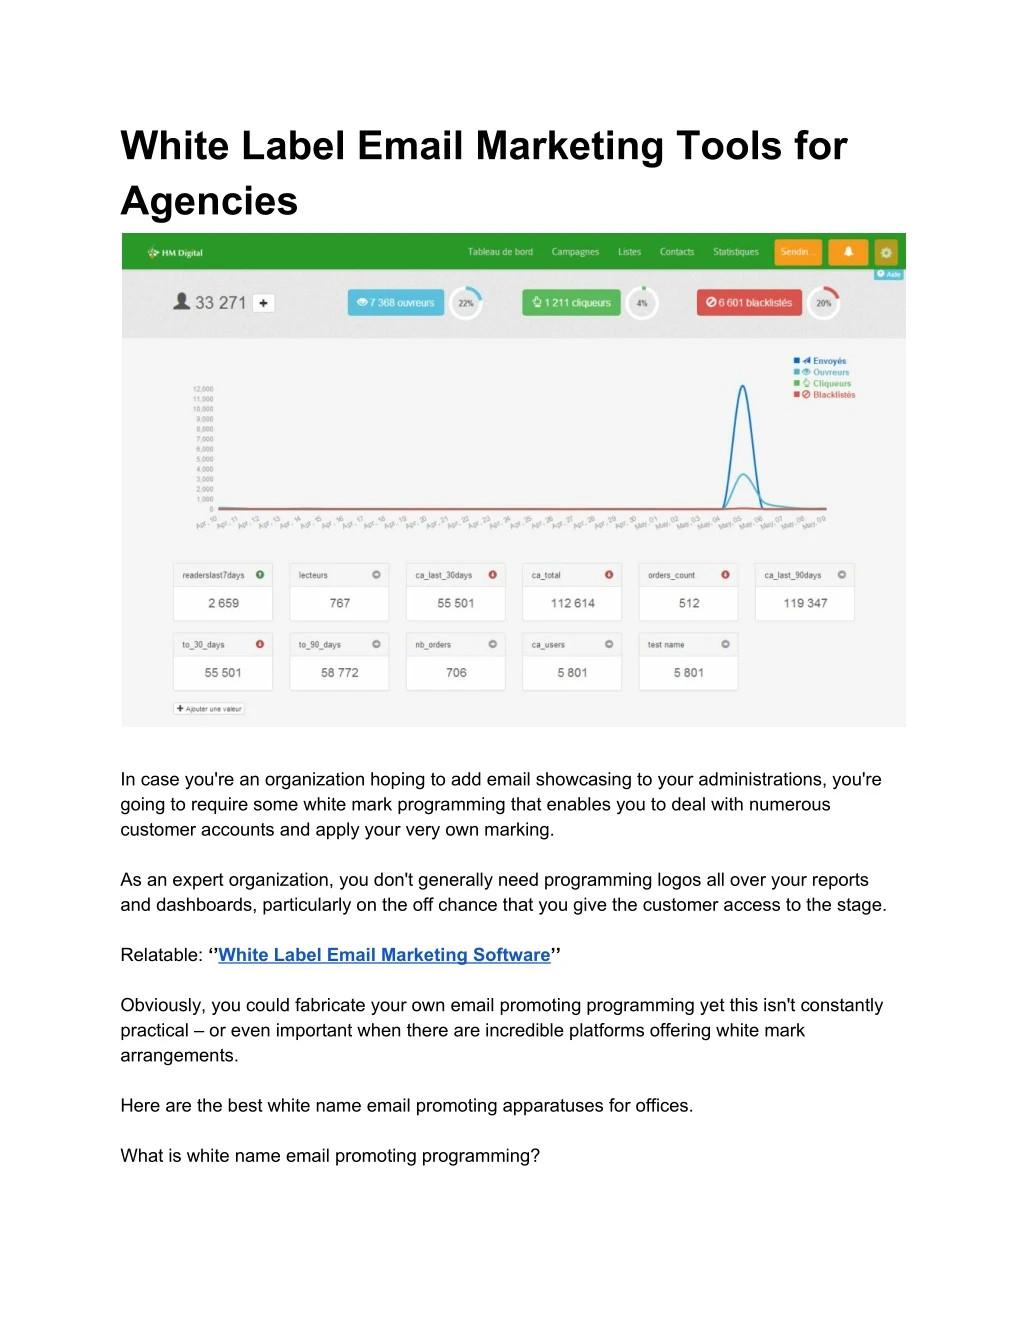 white label email marketing tools for agencies